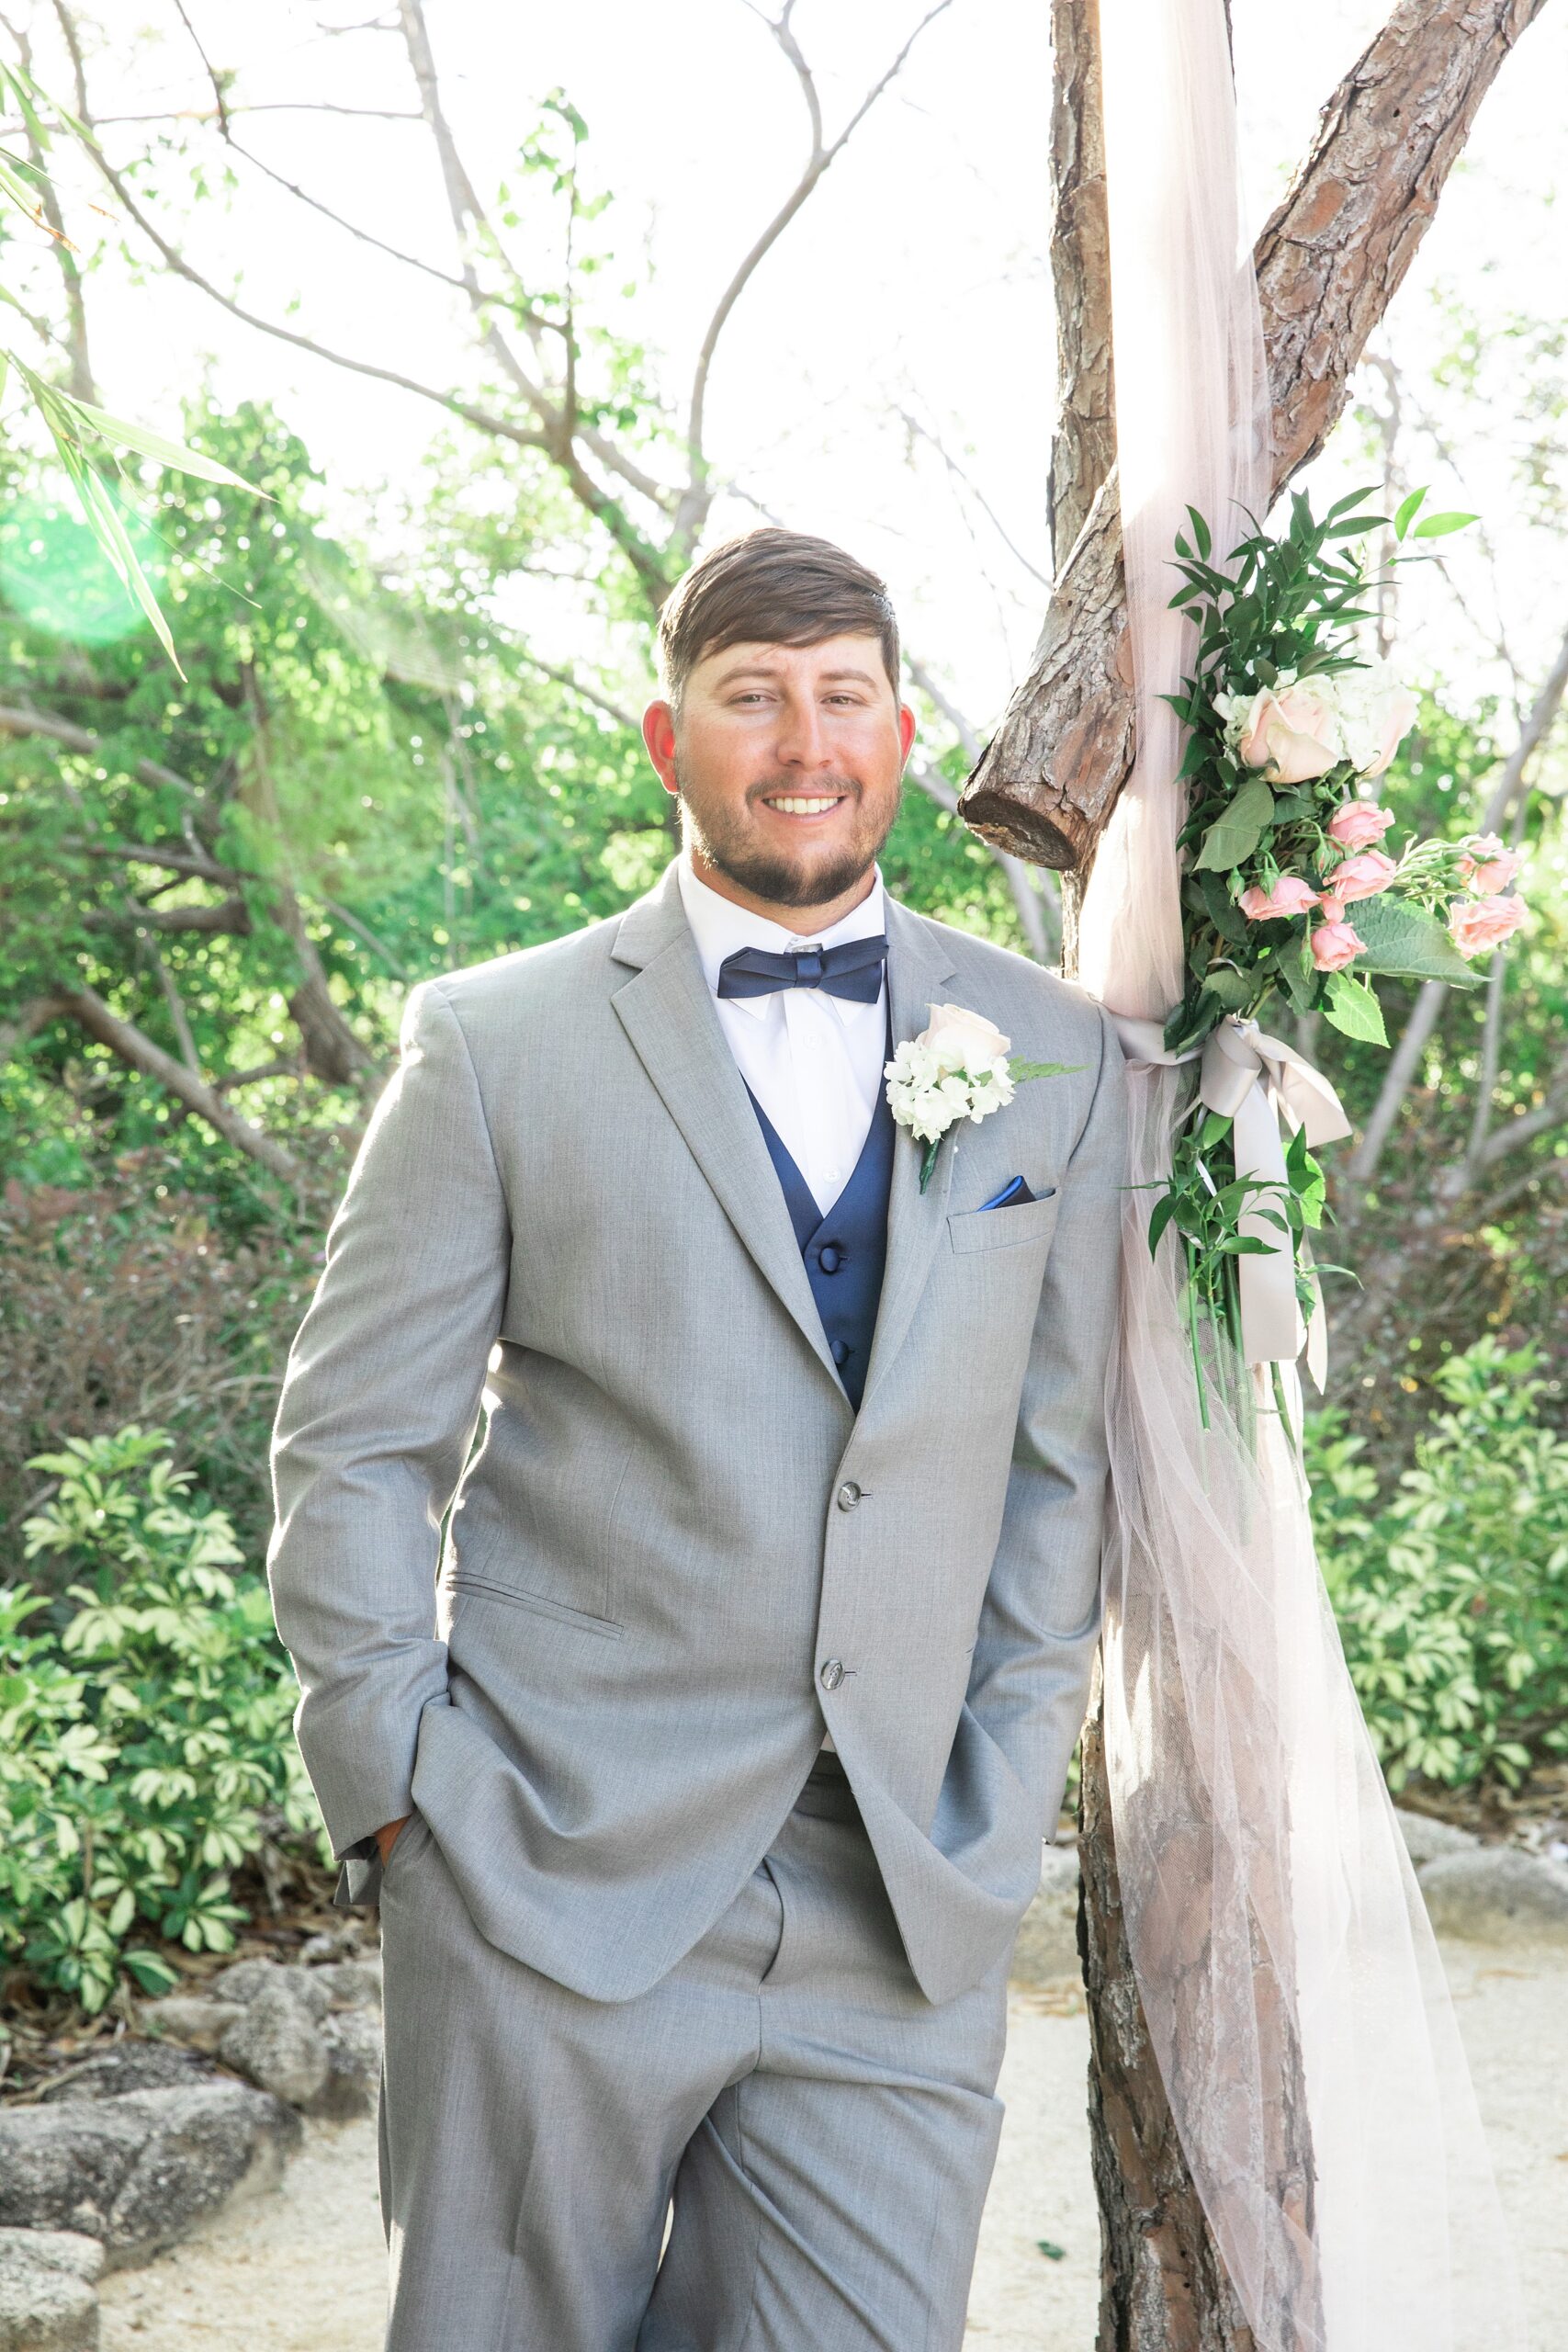 A groom in a grey suit leans against a pine tree arbor with pink flowers